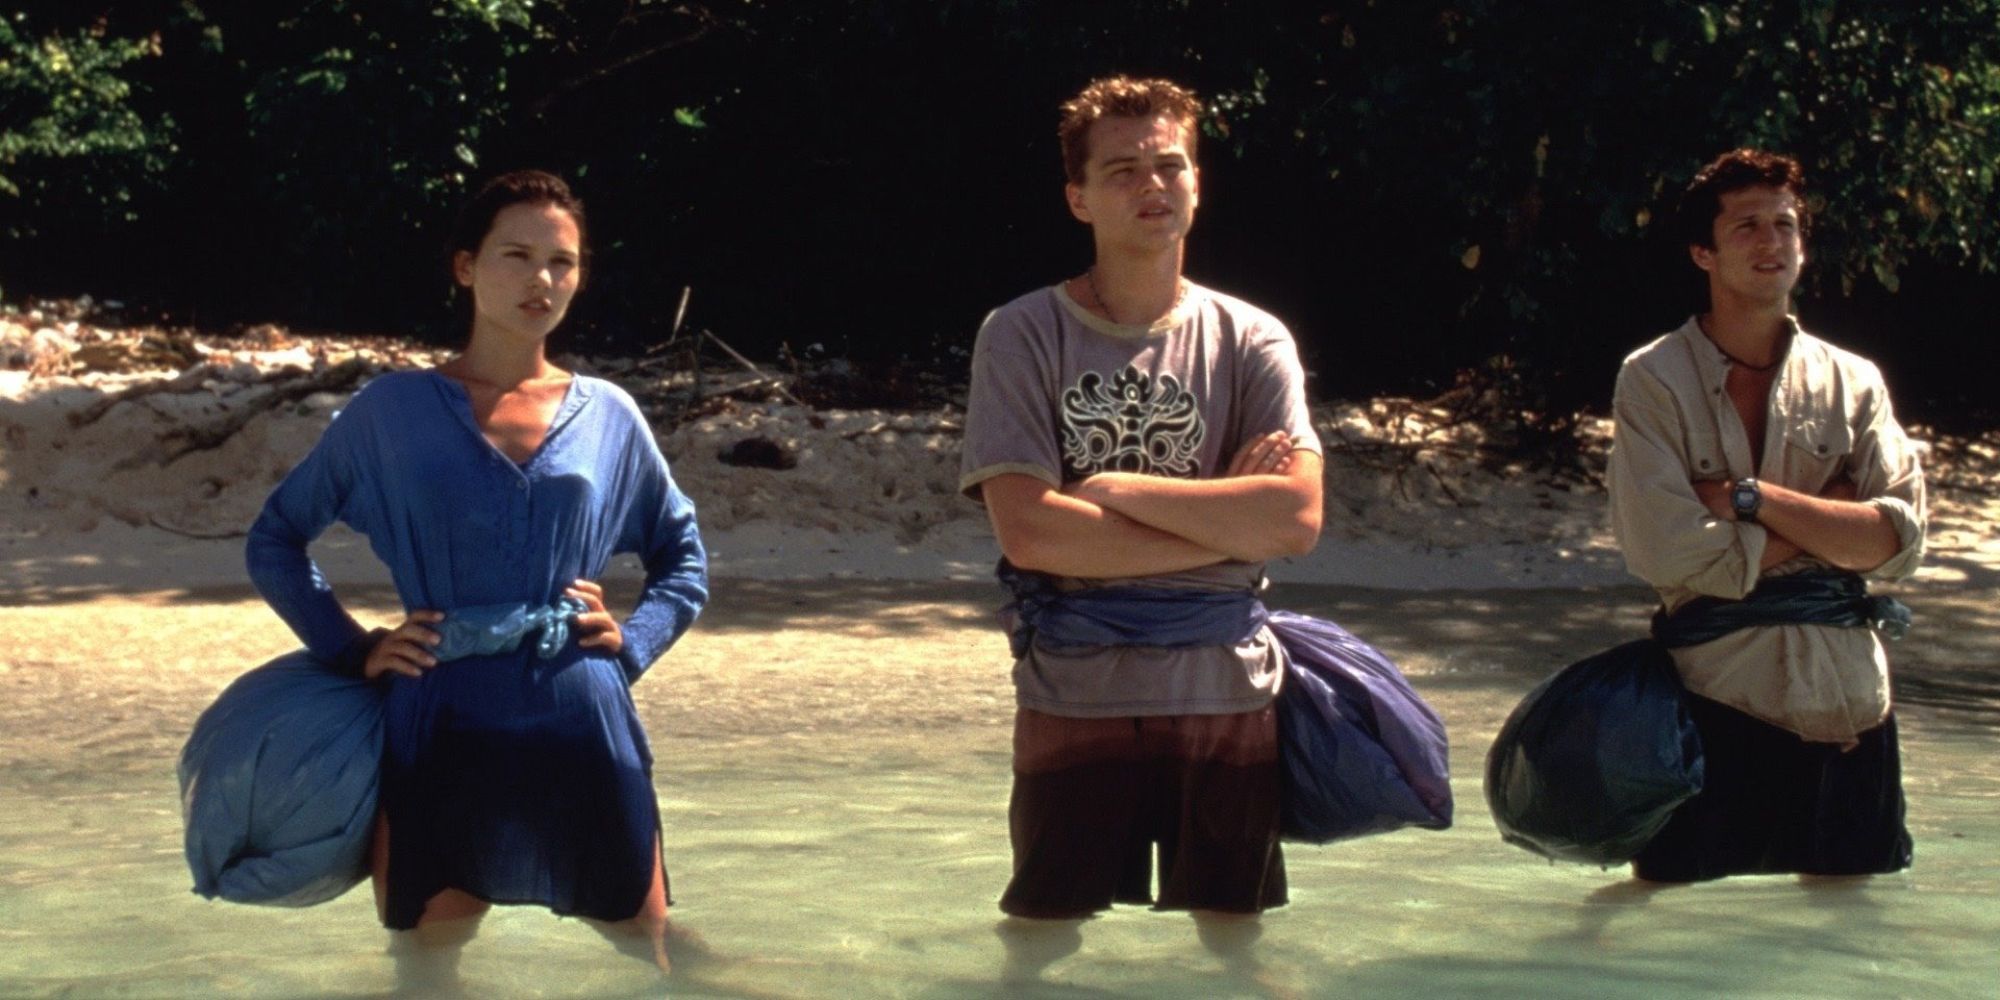 Virginie Ledoyen, Leonardo DiCaprio, Guillaume Canet standing together in The Beach